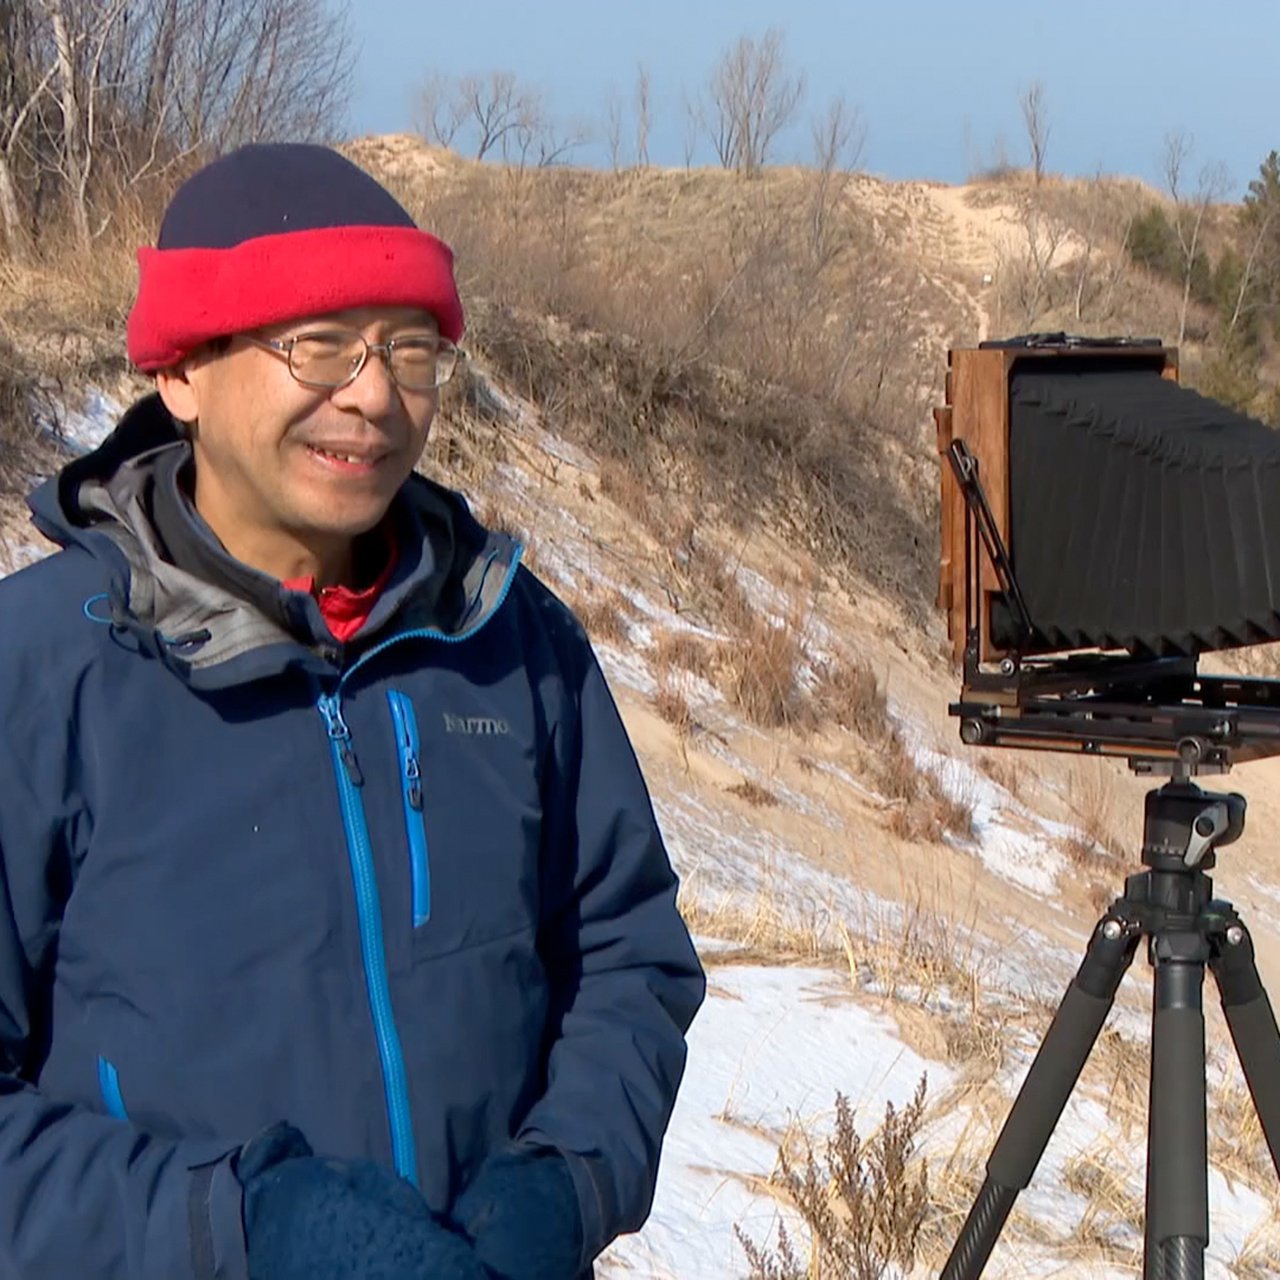 Top National Park Photographer Focuses on the Indiana Dunes